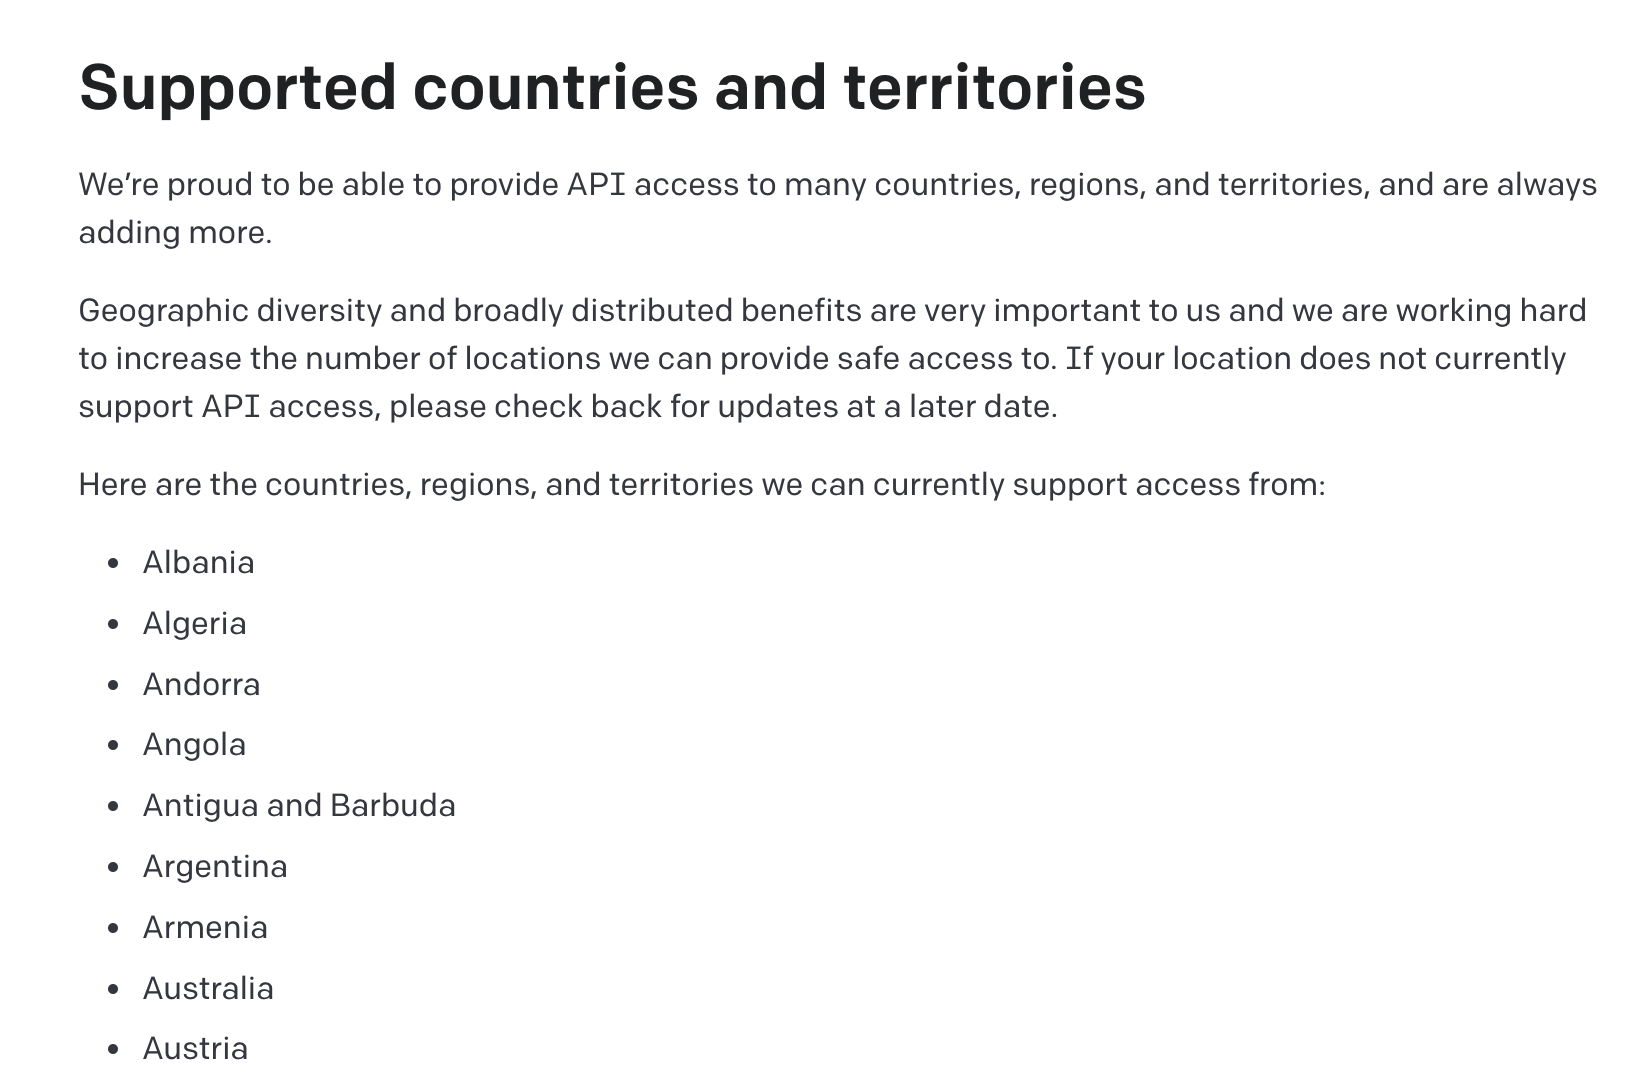 OpenAI's full list of supported countries and terrorists 